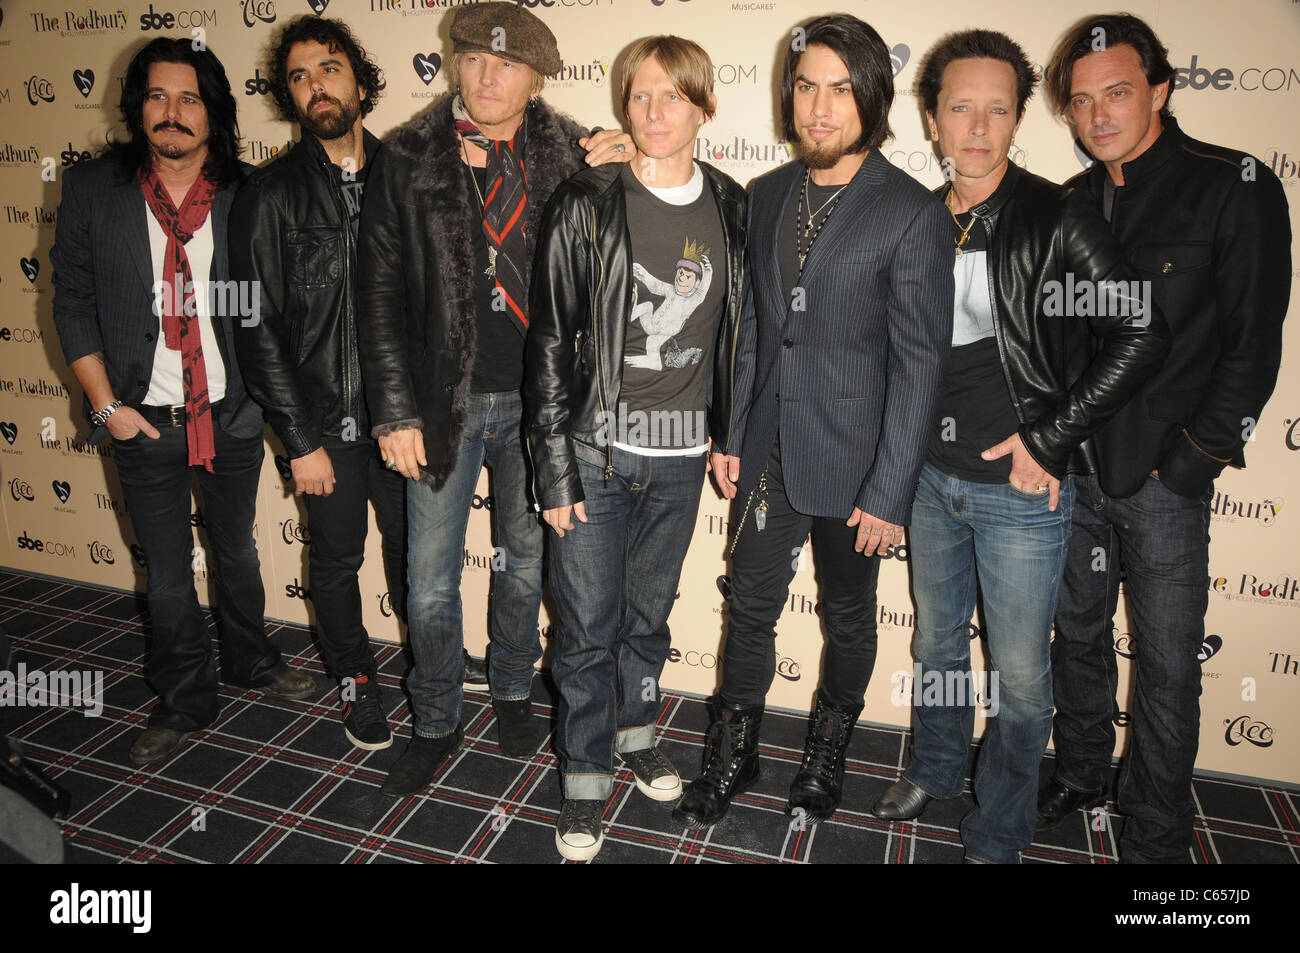 Camp Freddie (starting third from left) Matt Sorum, Chris Chaney, Dave Navarro, Billy Morrison, Donovan Leitch, Jr), in attendance for Grand Opening of sbe's The Redbury Hotel, Hollywood, Los Angeles, CA October 20, 2010. Photo By: Dee Cercone/Everett Collection Stock Photo